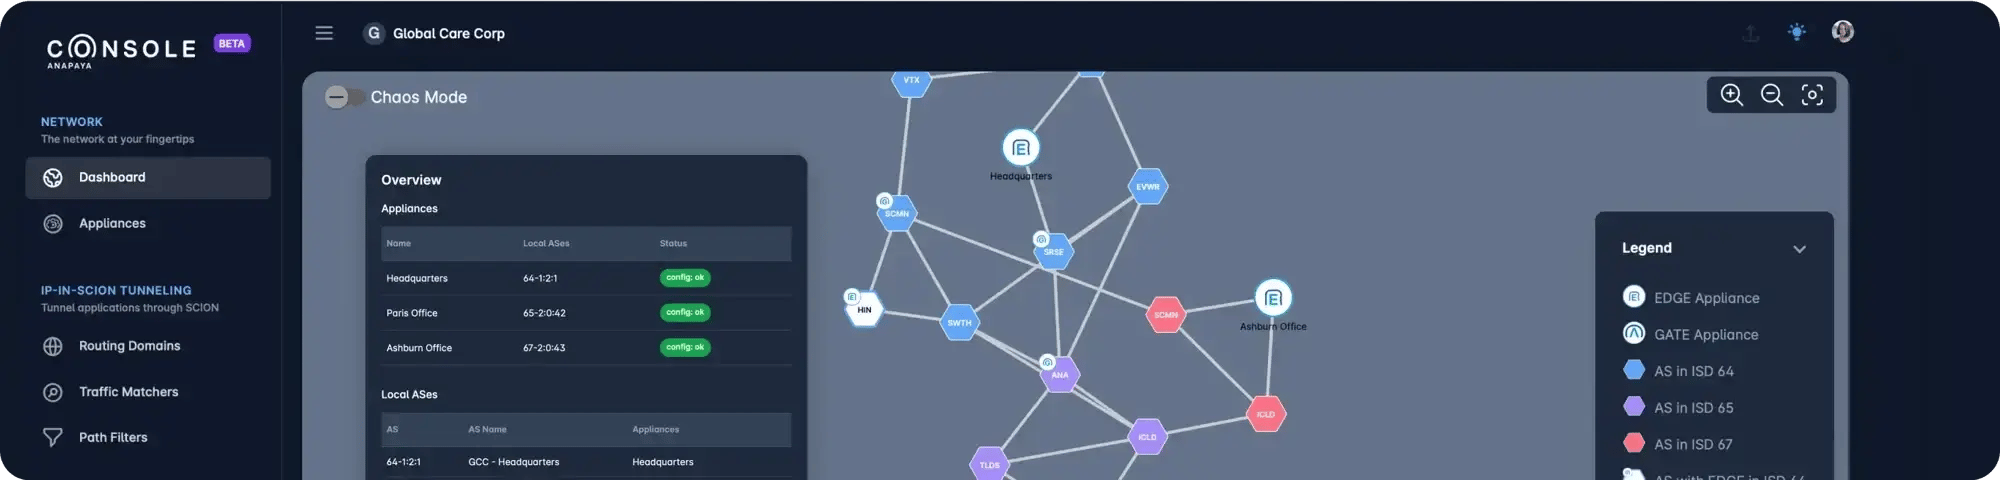 Anapaya Console dashboard with network overview.